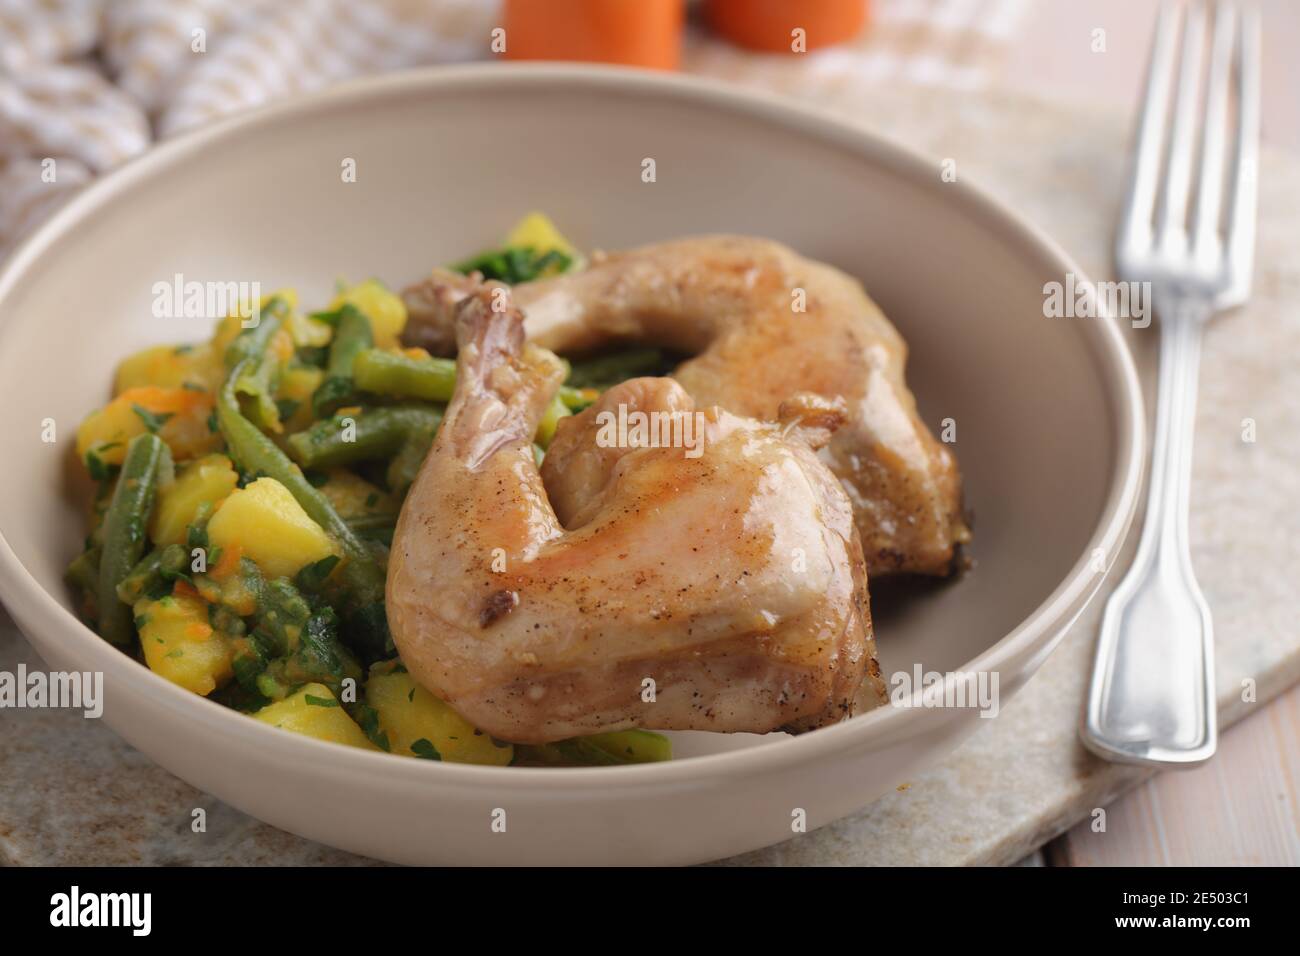 Chicken legs with potatoes and green beans Stock Photo